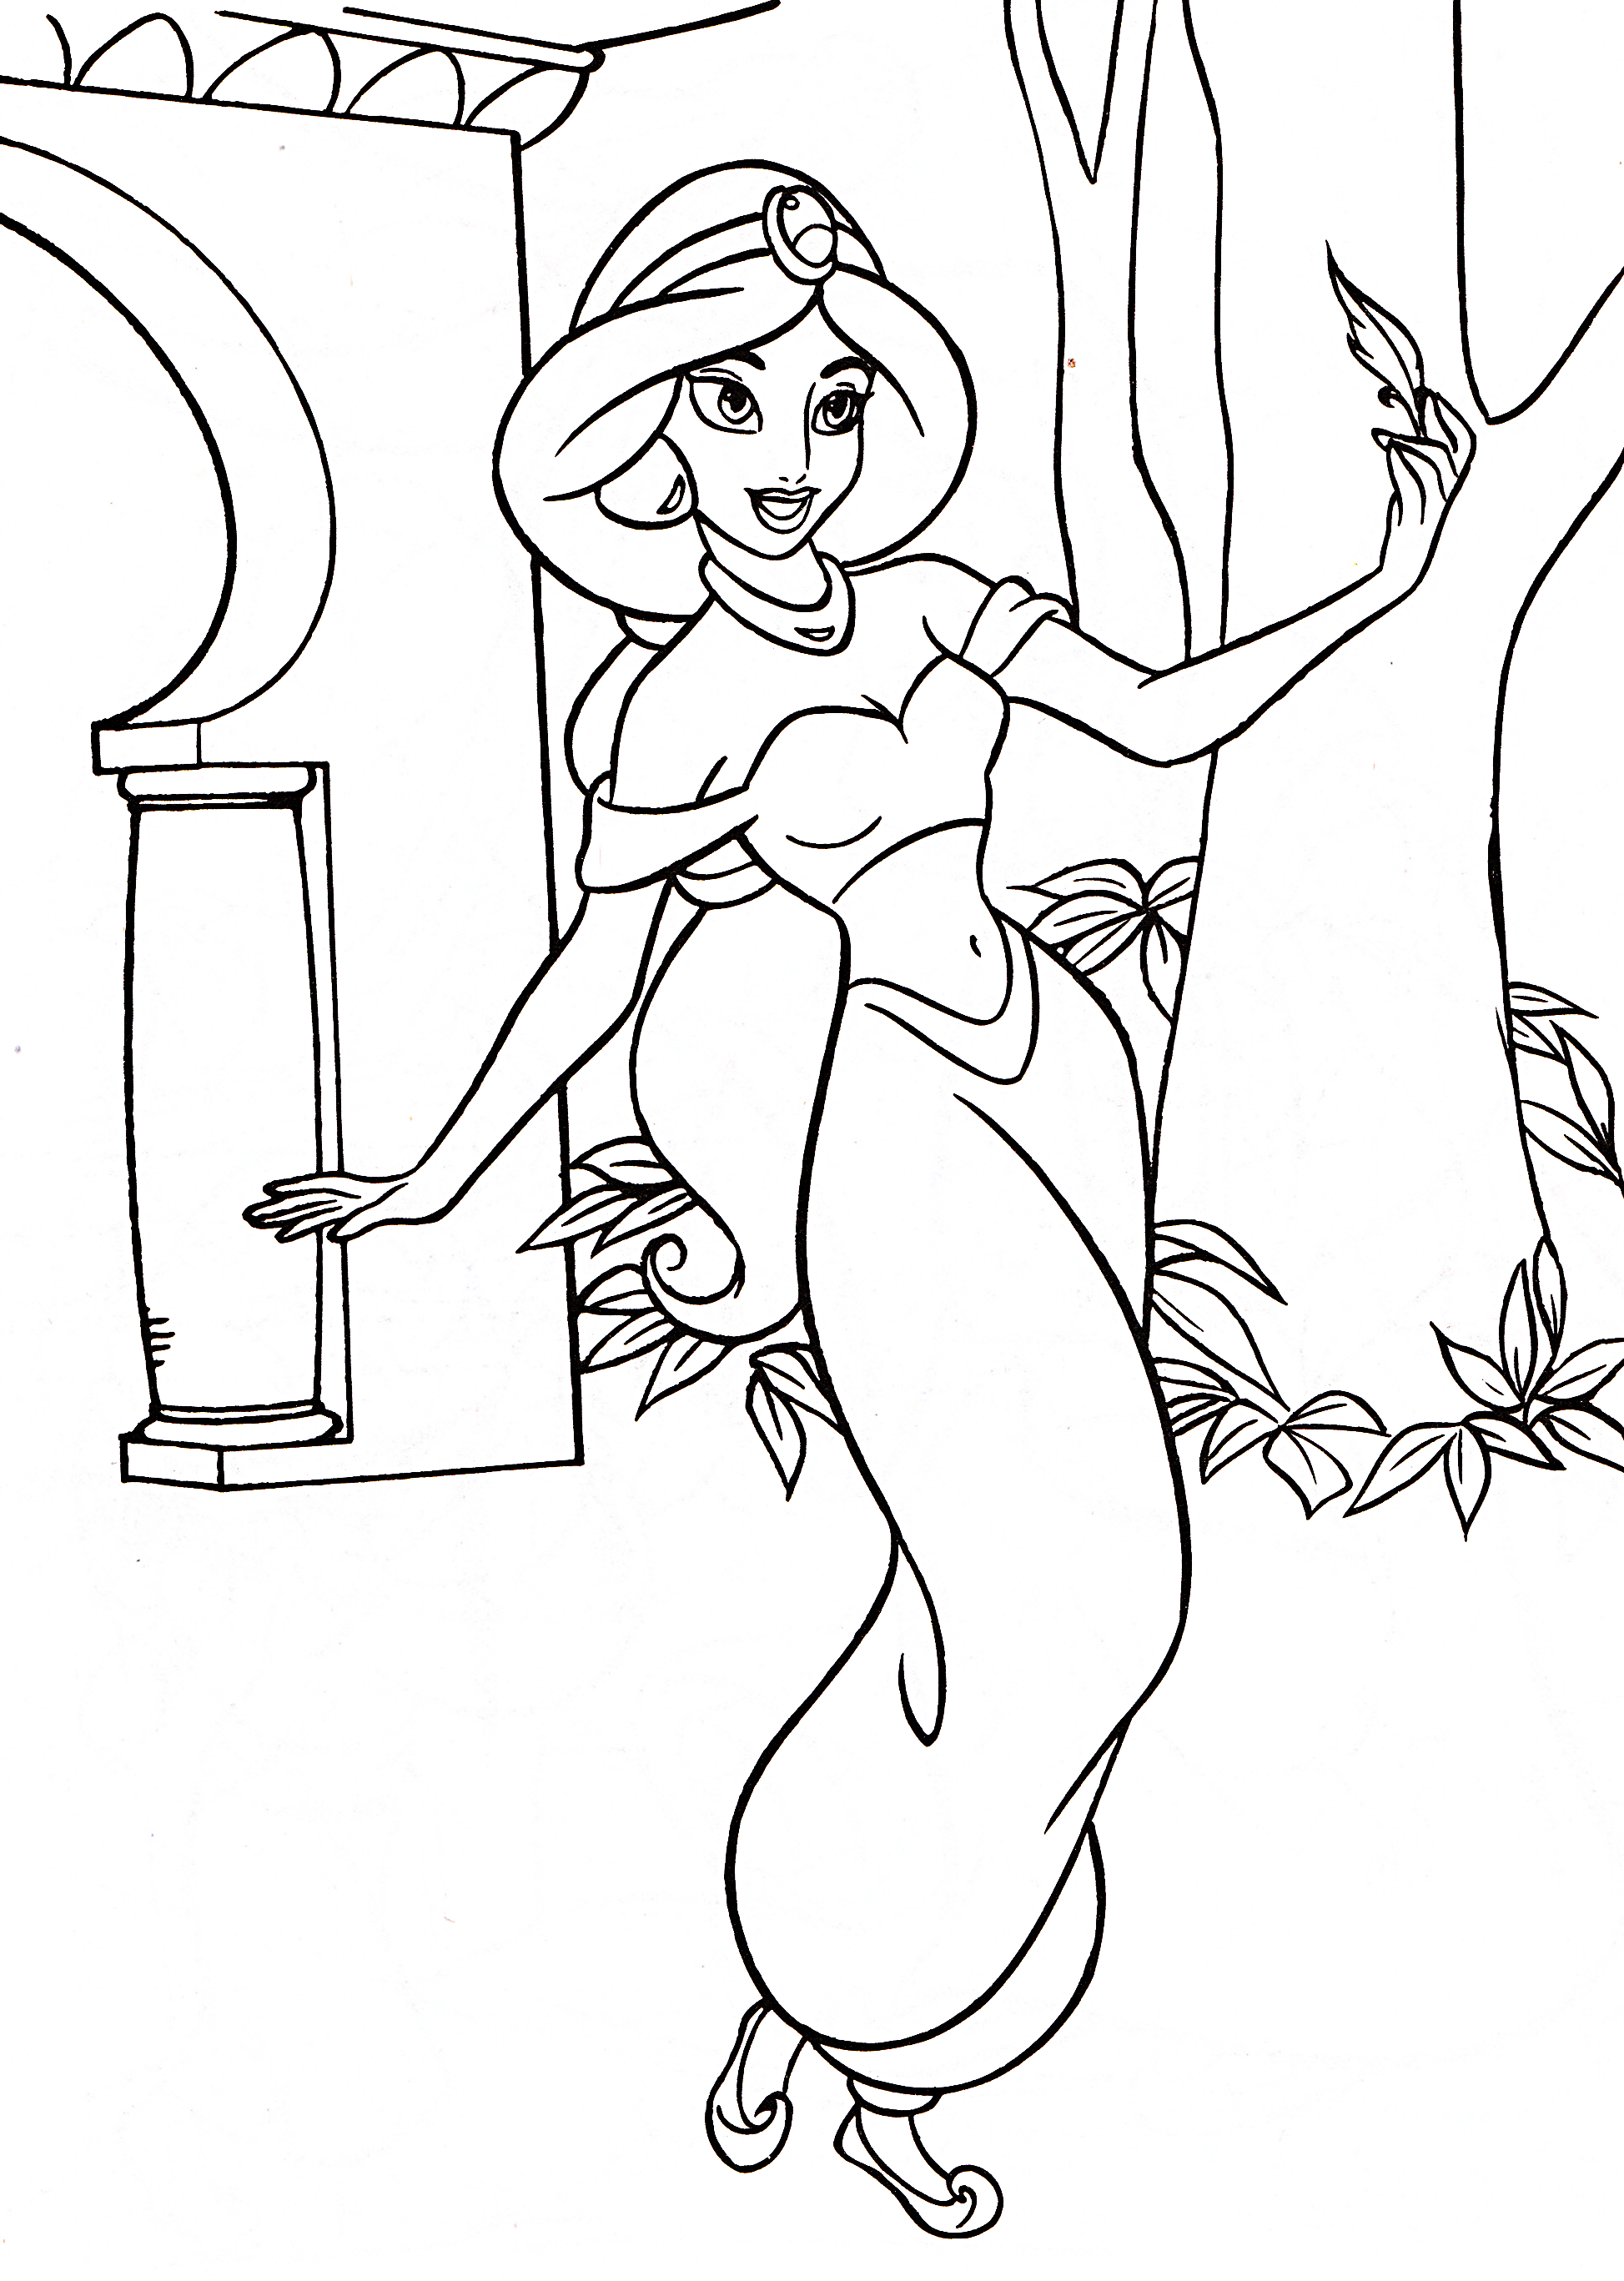 disney-princess-coloring-pages-jammyte